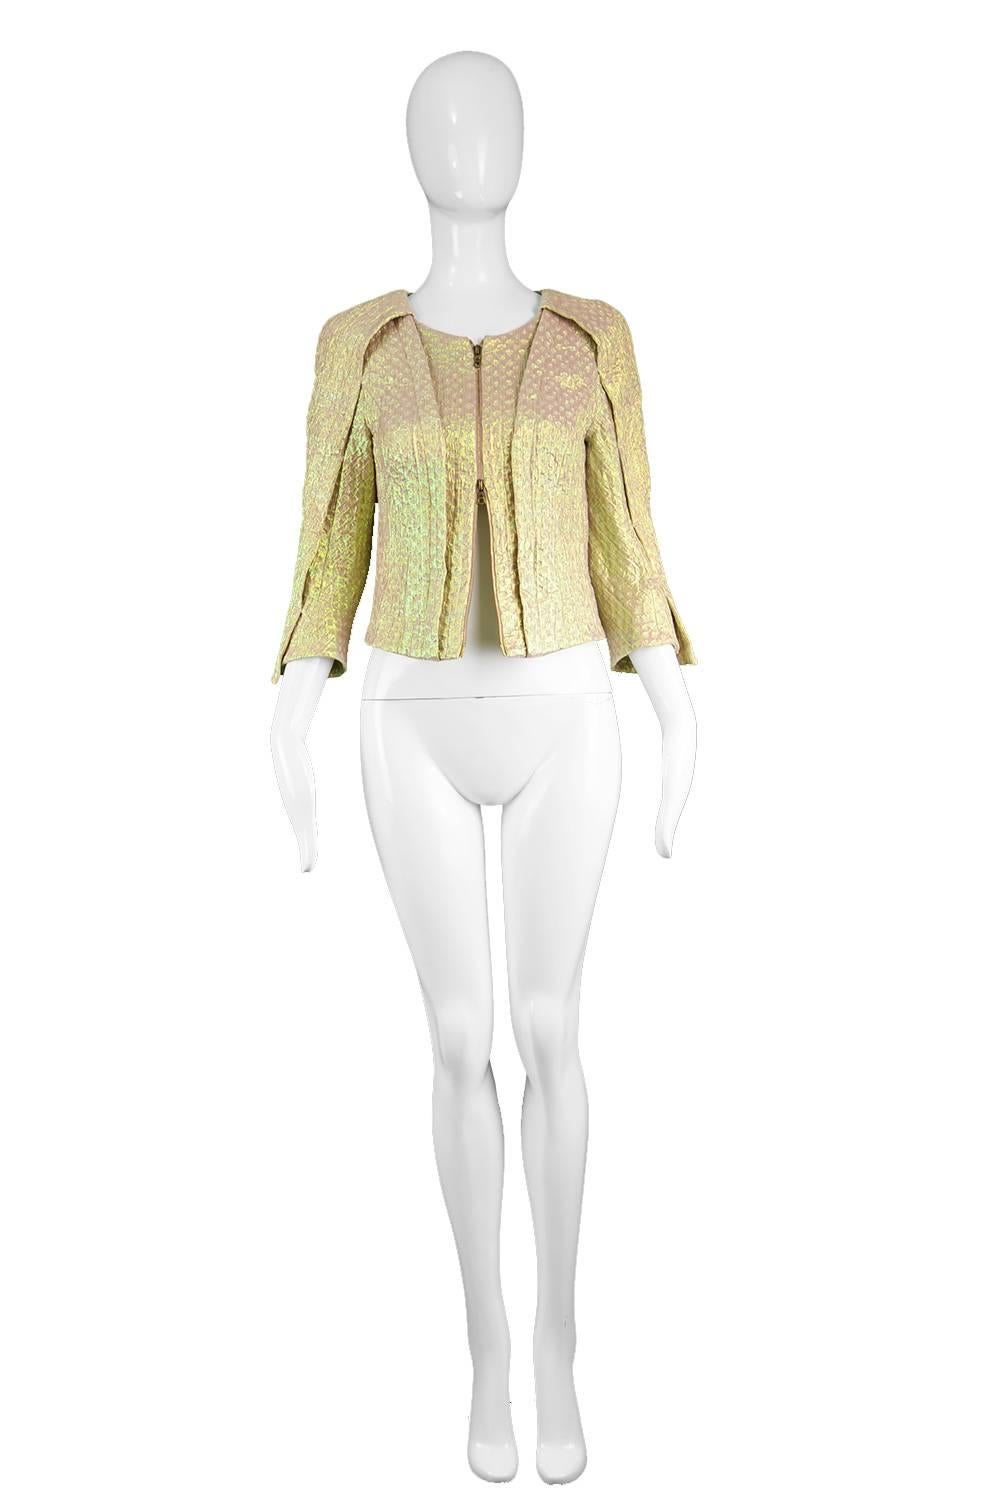 Nina Ricci Textured Iridescent Gold Lamé Futuristic Women's Blazer Jacket 

Size: Marked EU 36 which is roughly a UK 8/ US 4. Please check measurements. 
Bust - 32” / 81cm
Waist - 31” / 79cm
Length (Shoulder to Hem) - 18” / 46cm
Sleeve Pit to Cuff -